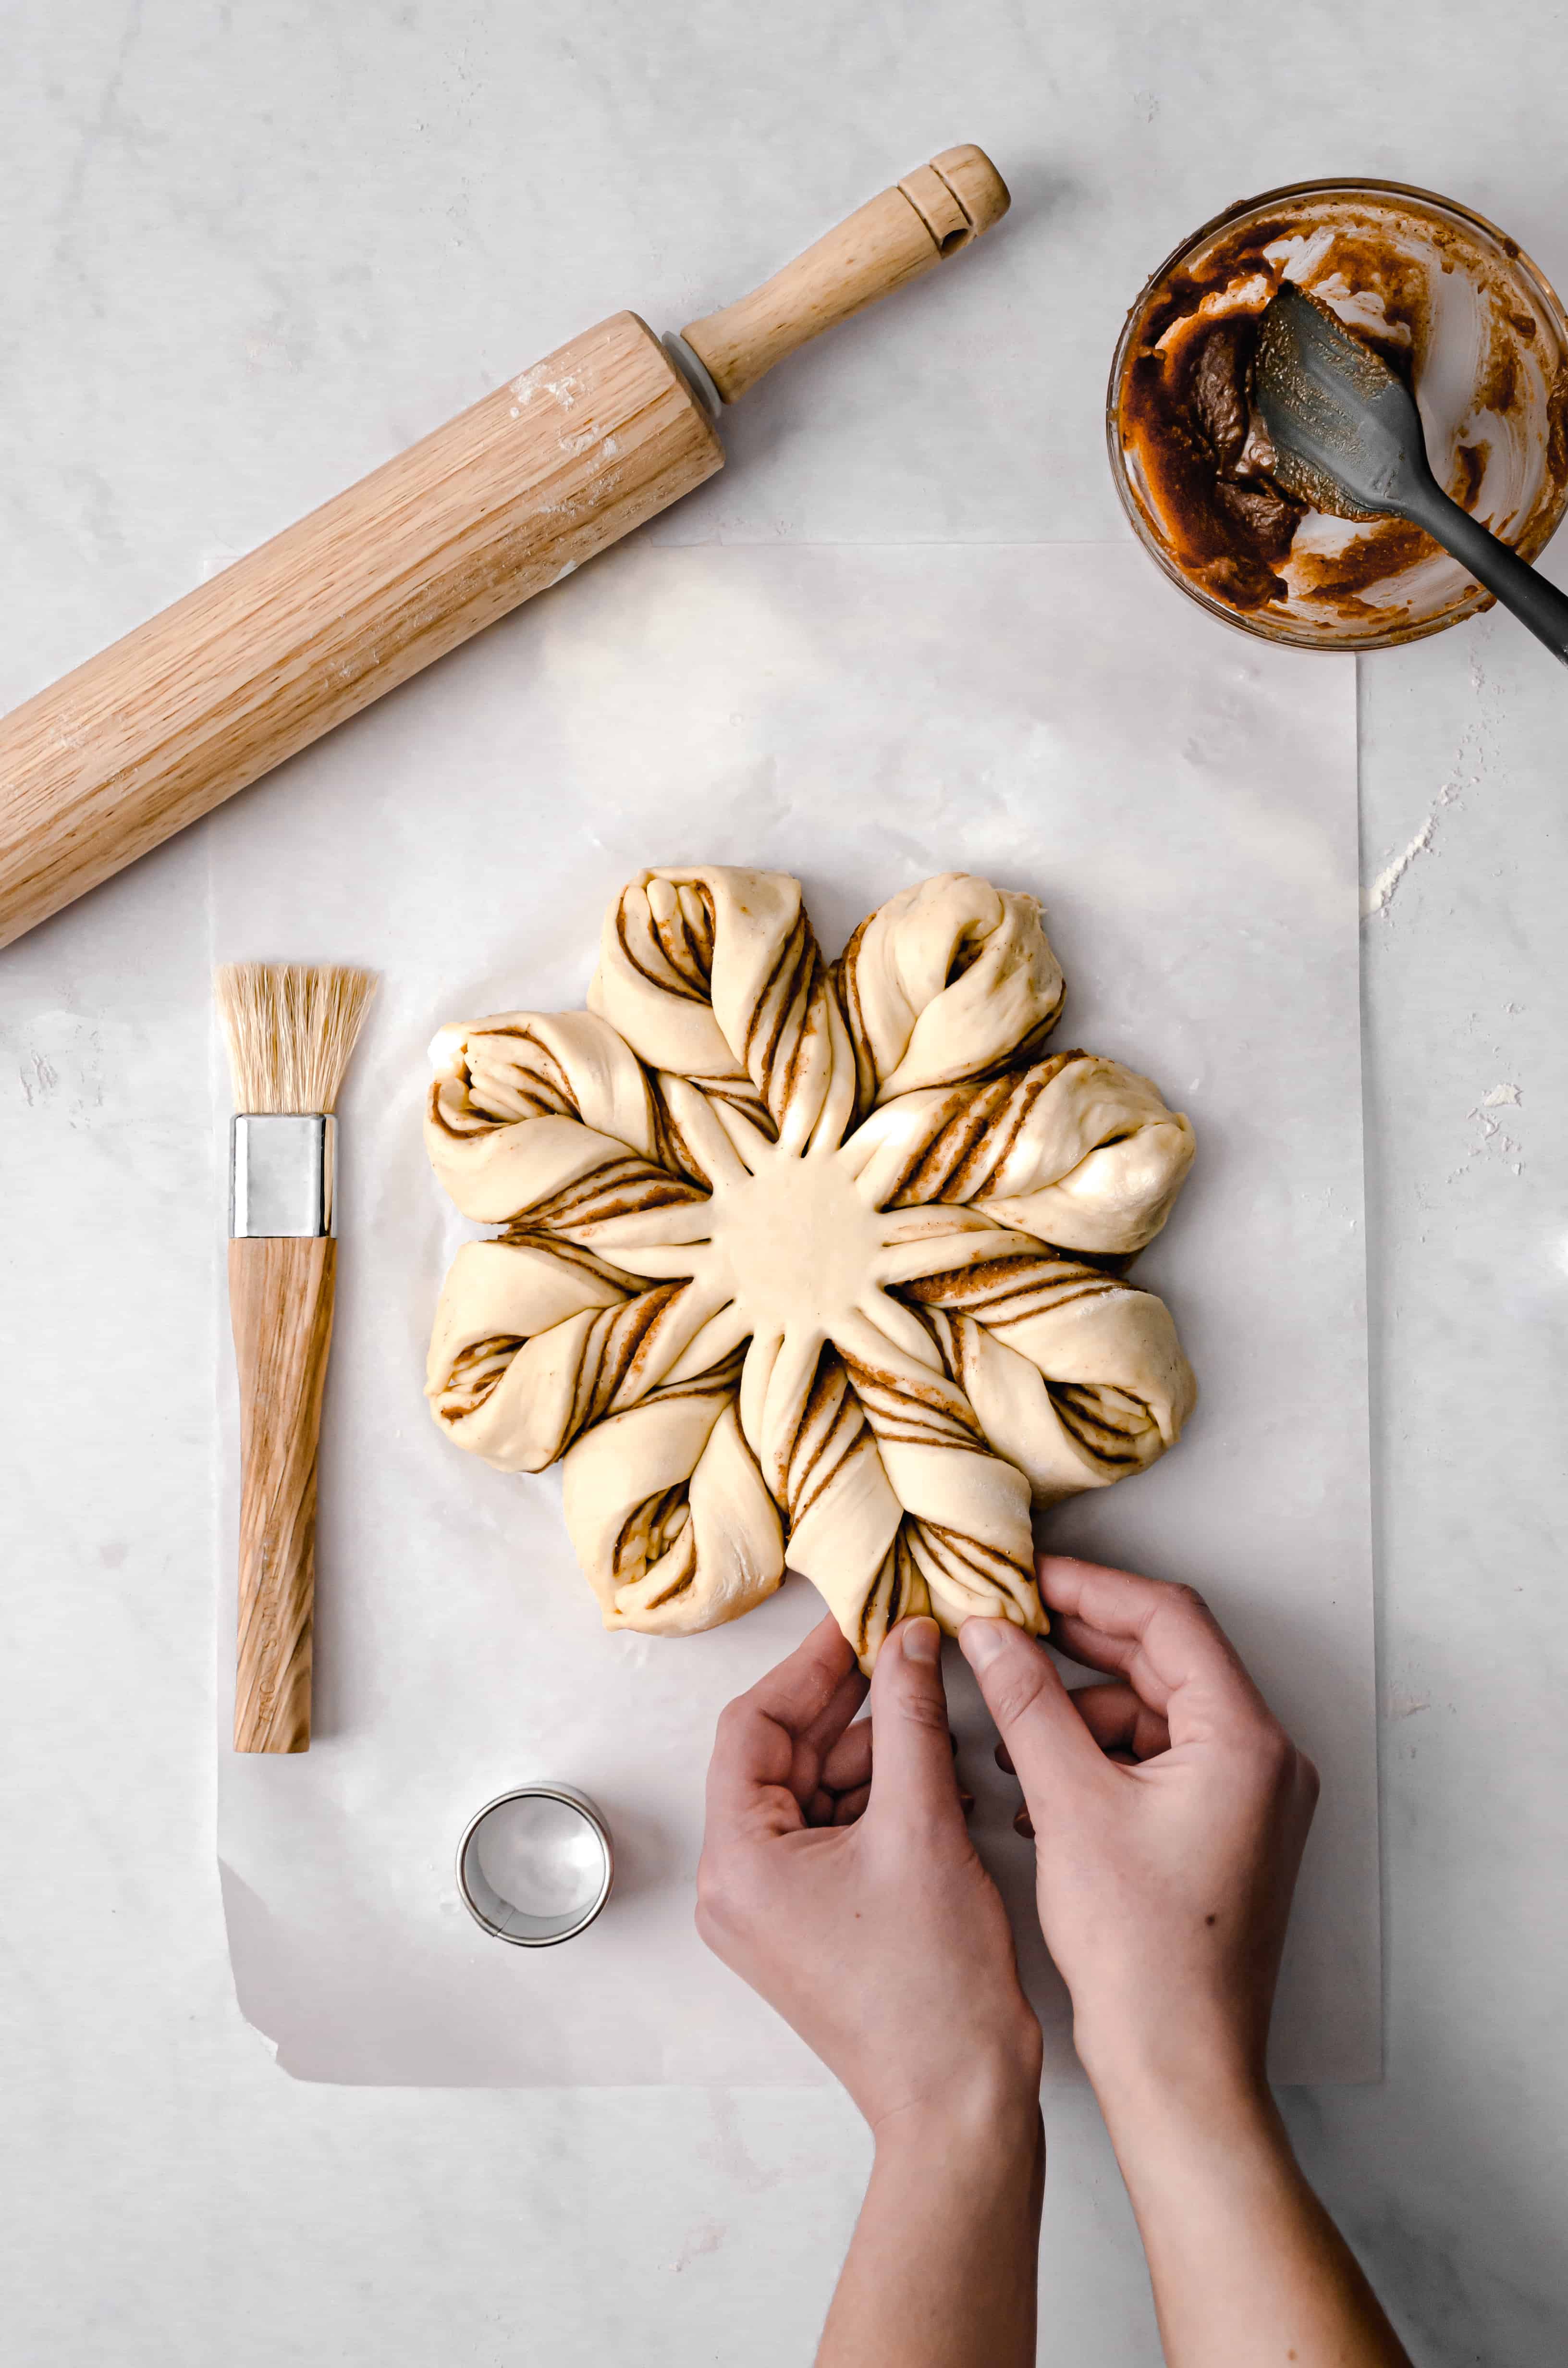 assembly of star bread with hands demonstrating how to shape it.